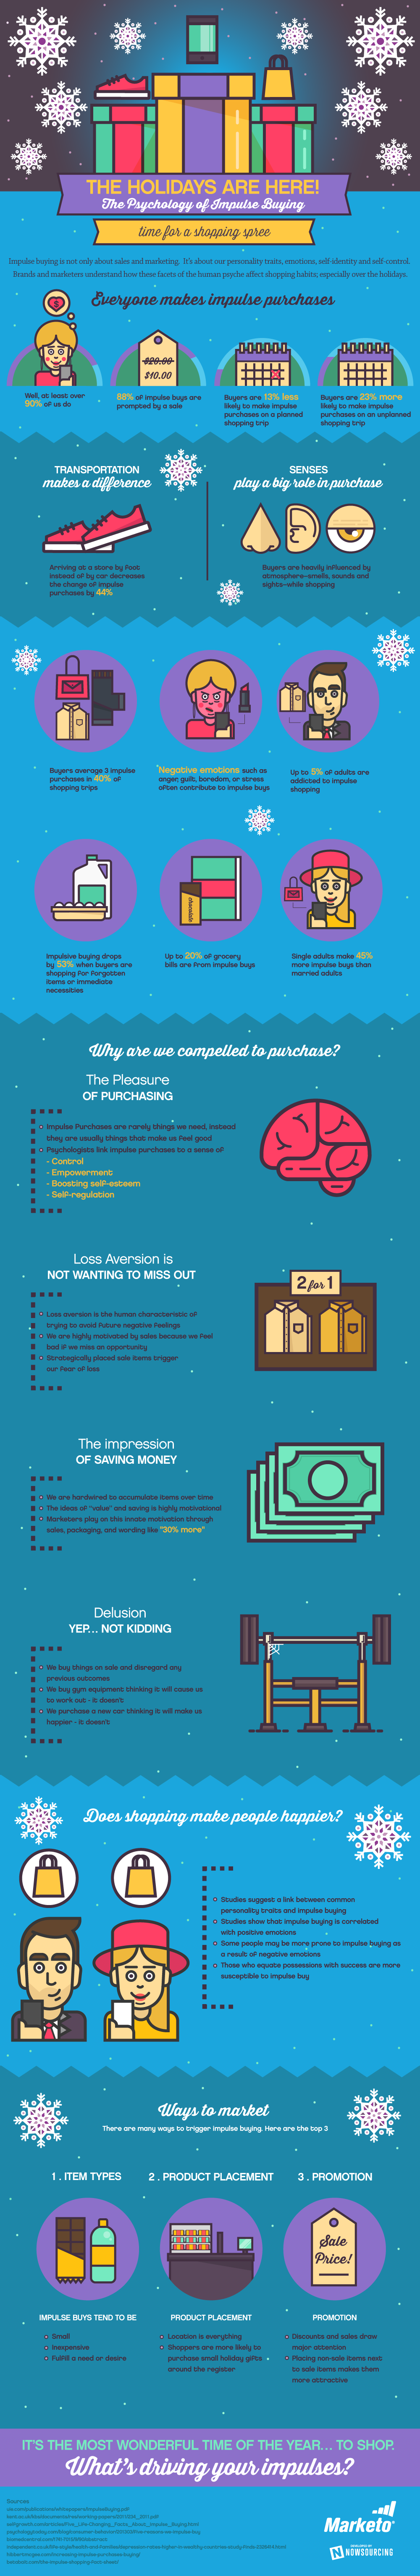 The Holidays Are Here: The Psychology Of Impulse Buying